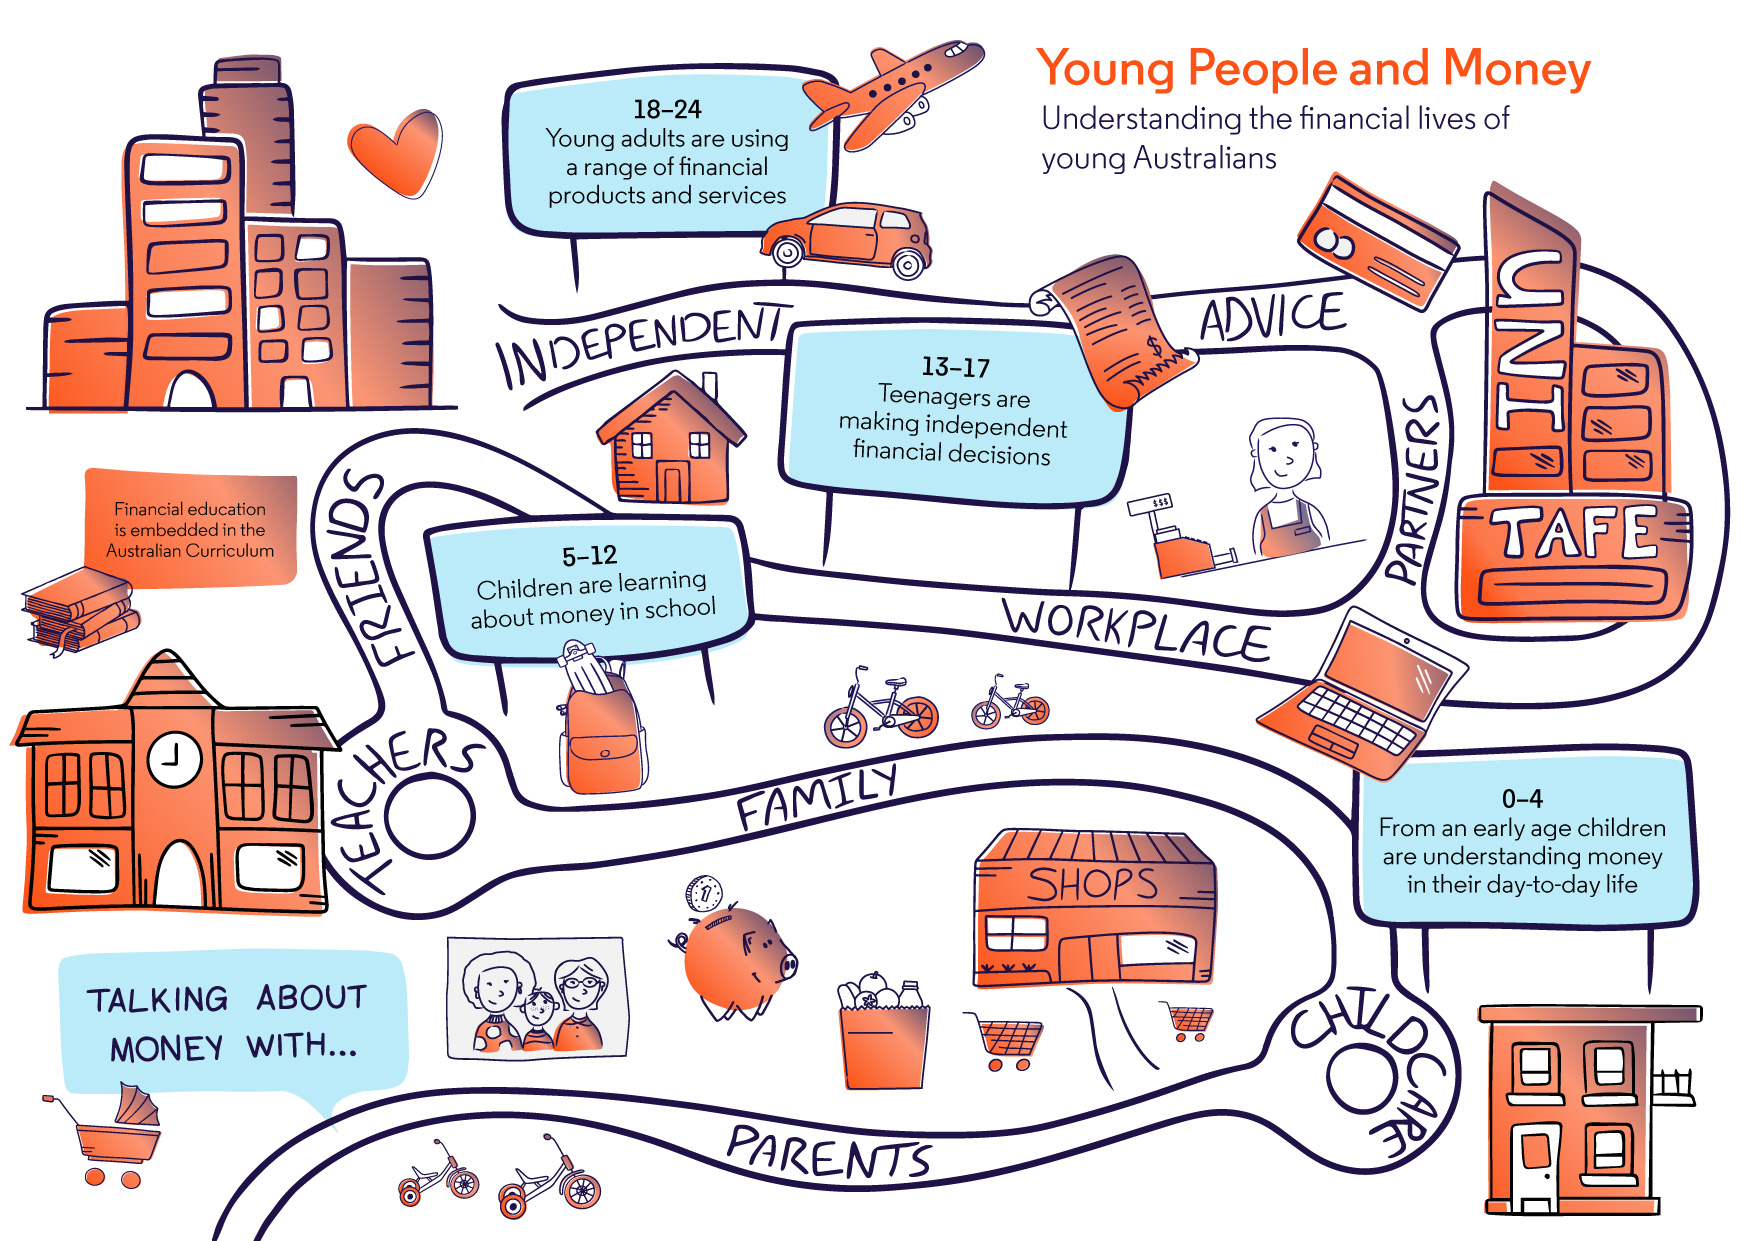 Young people and money journey map